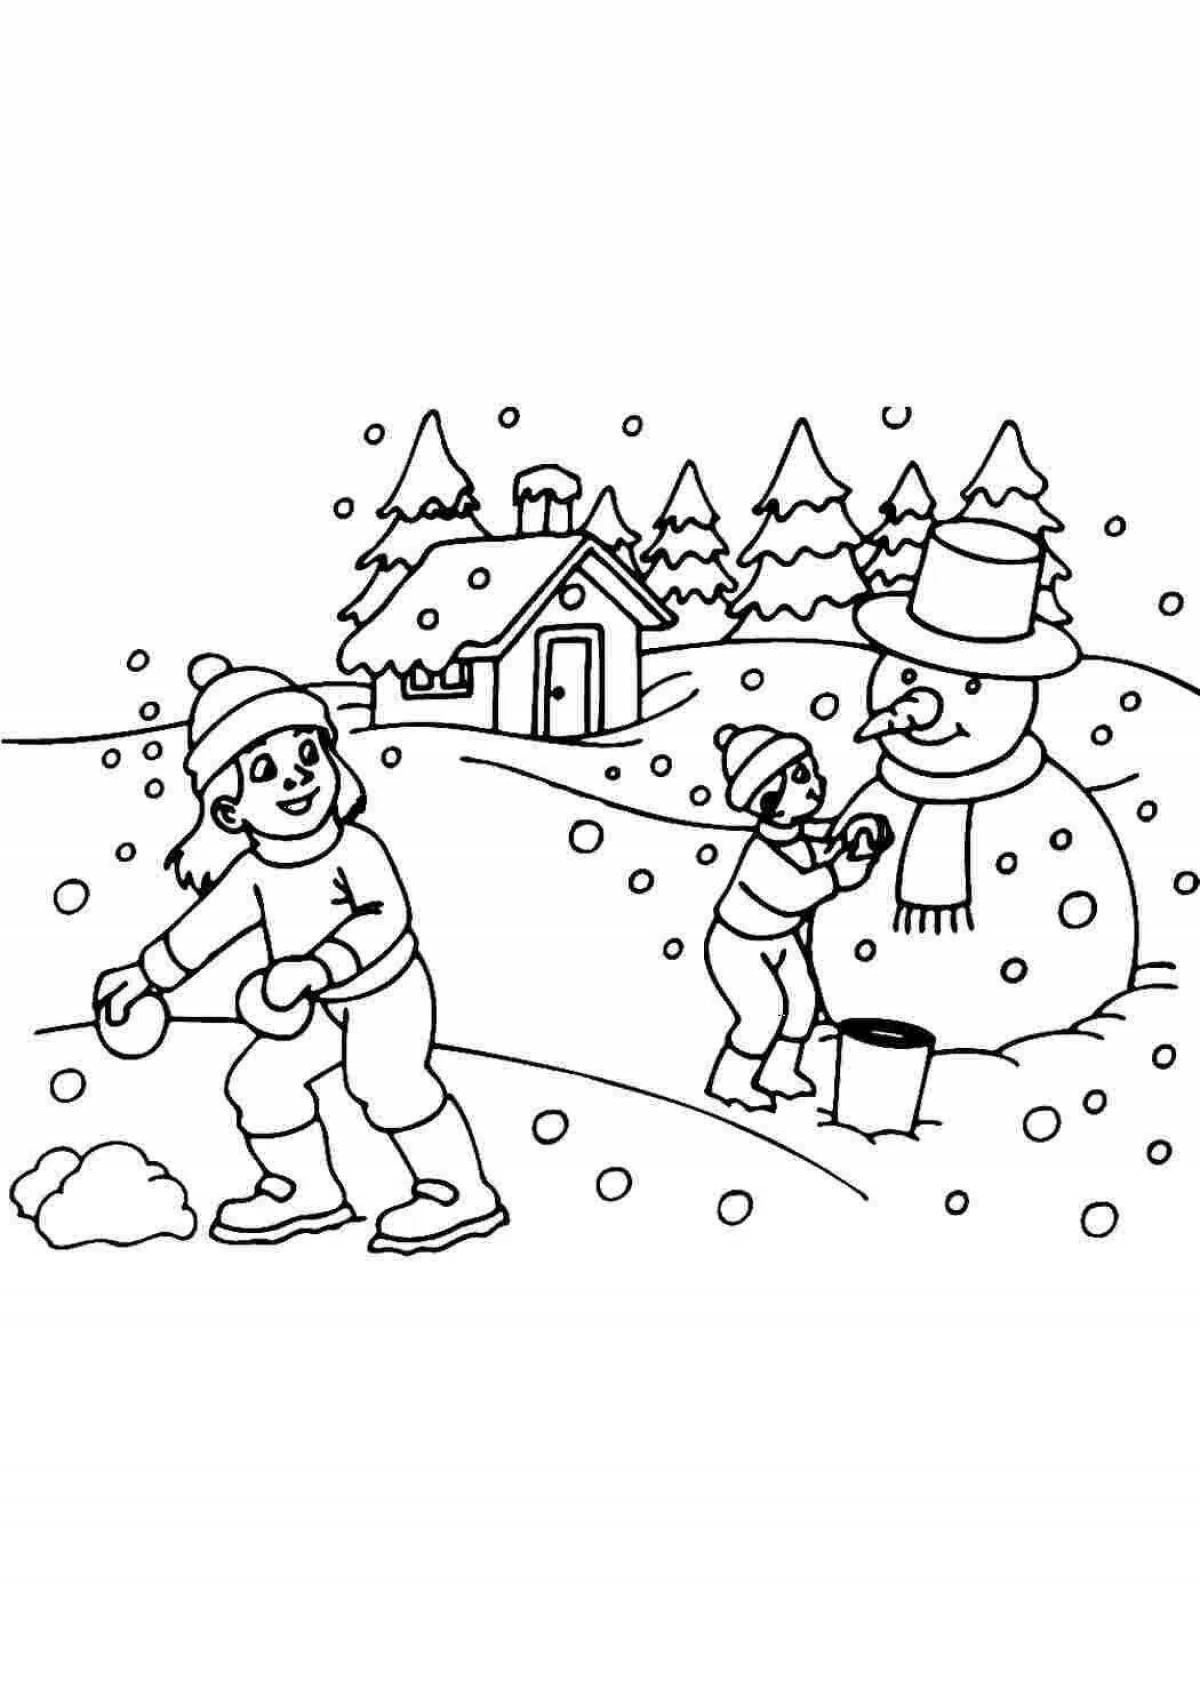 Exquisite snow castle coloring book for kids